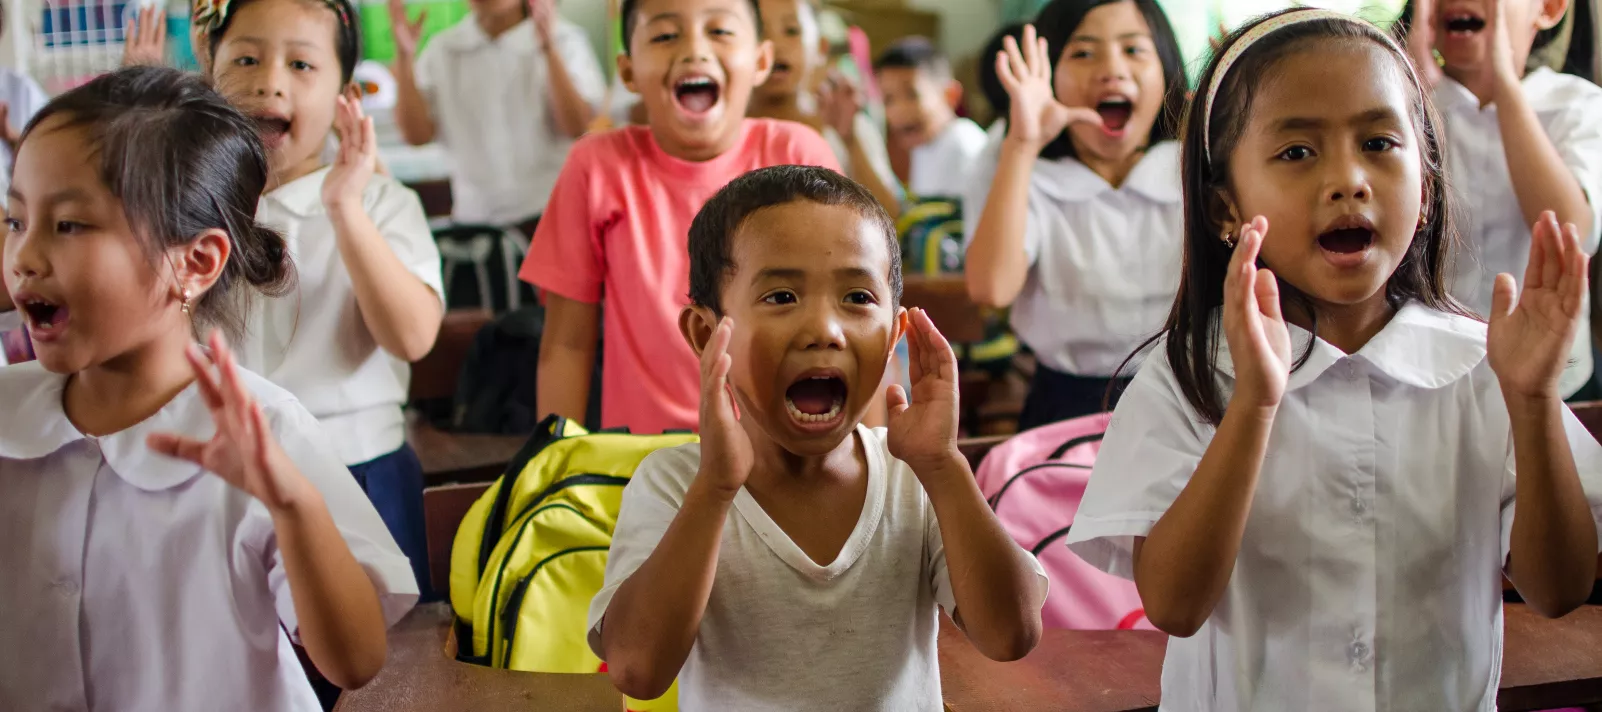 Children stand up and and yell during a class activity inside a classroom